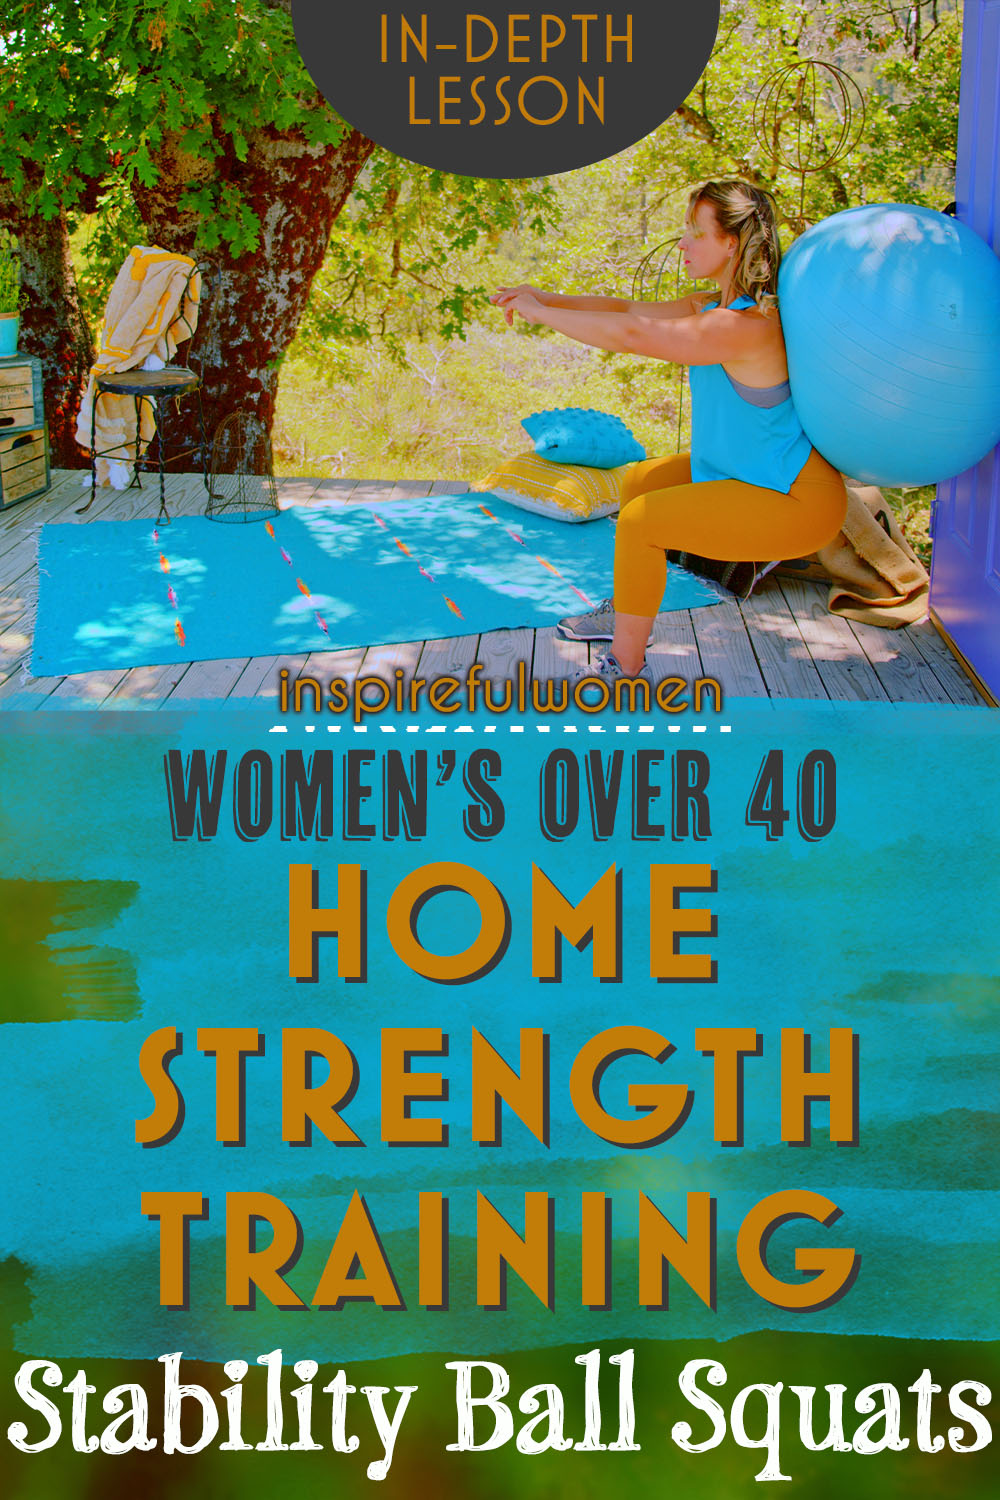 stability-ball-squats-variation-for-bad-knees-lower-body-strength-exercise-women-40+